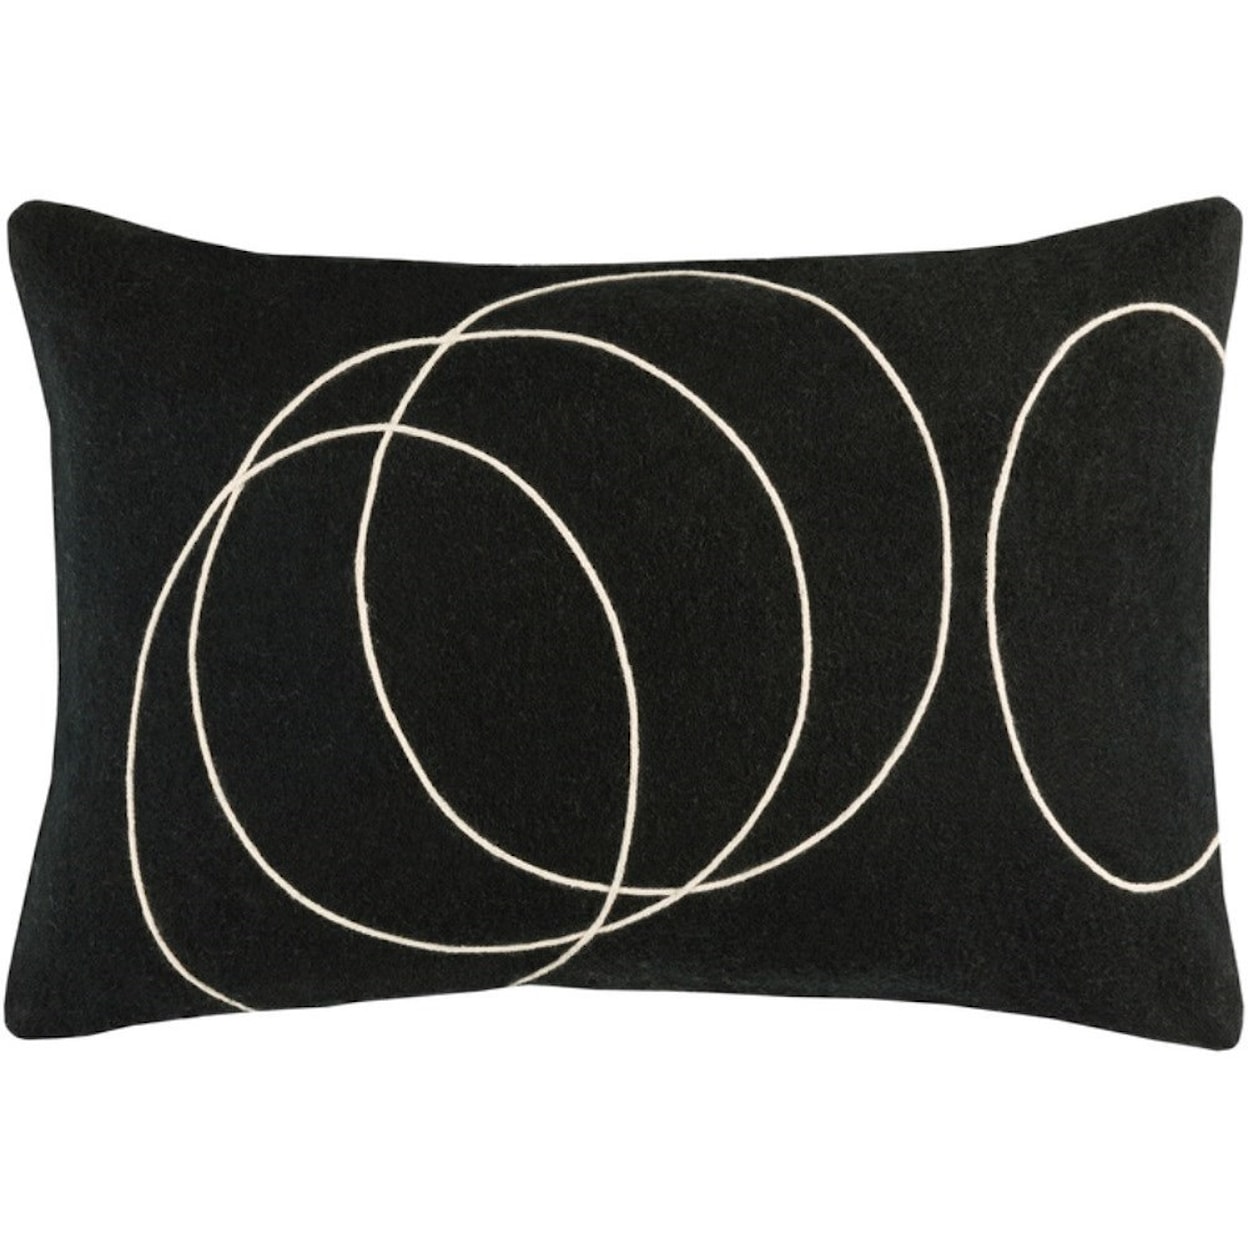 Surya Solid Bold Pillow